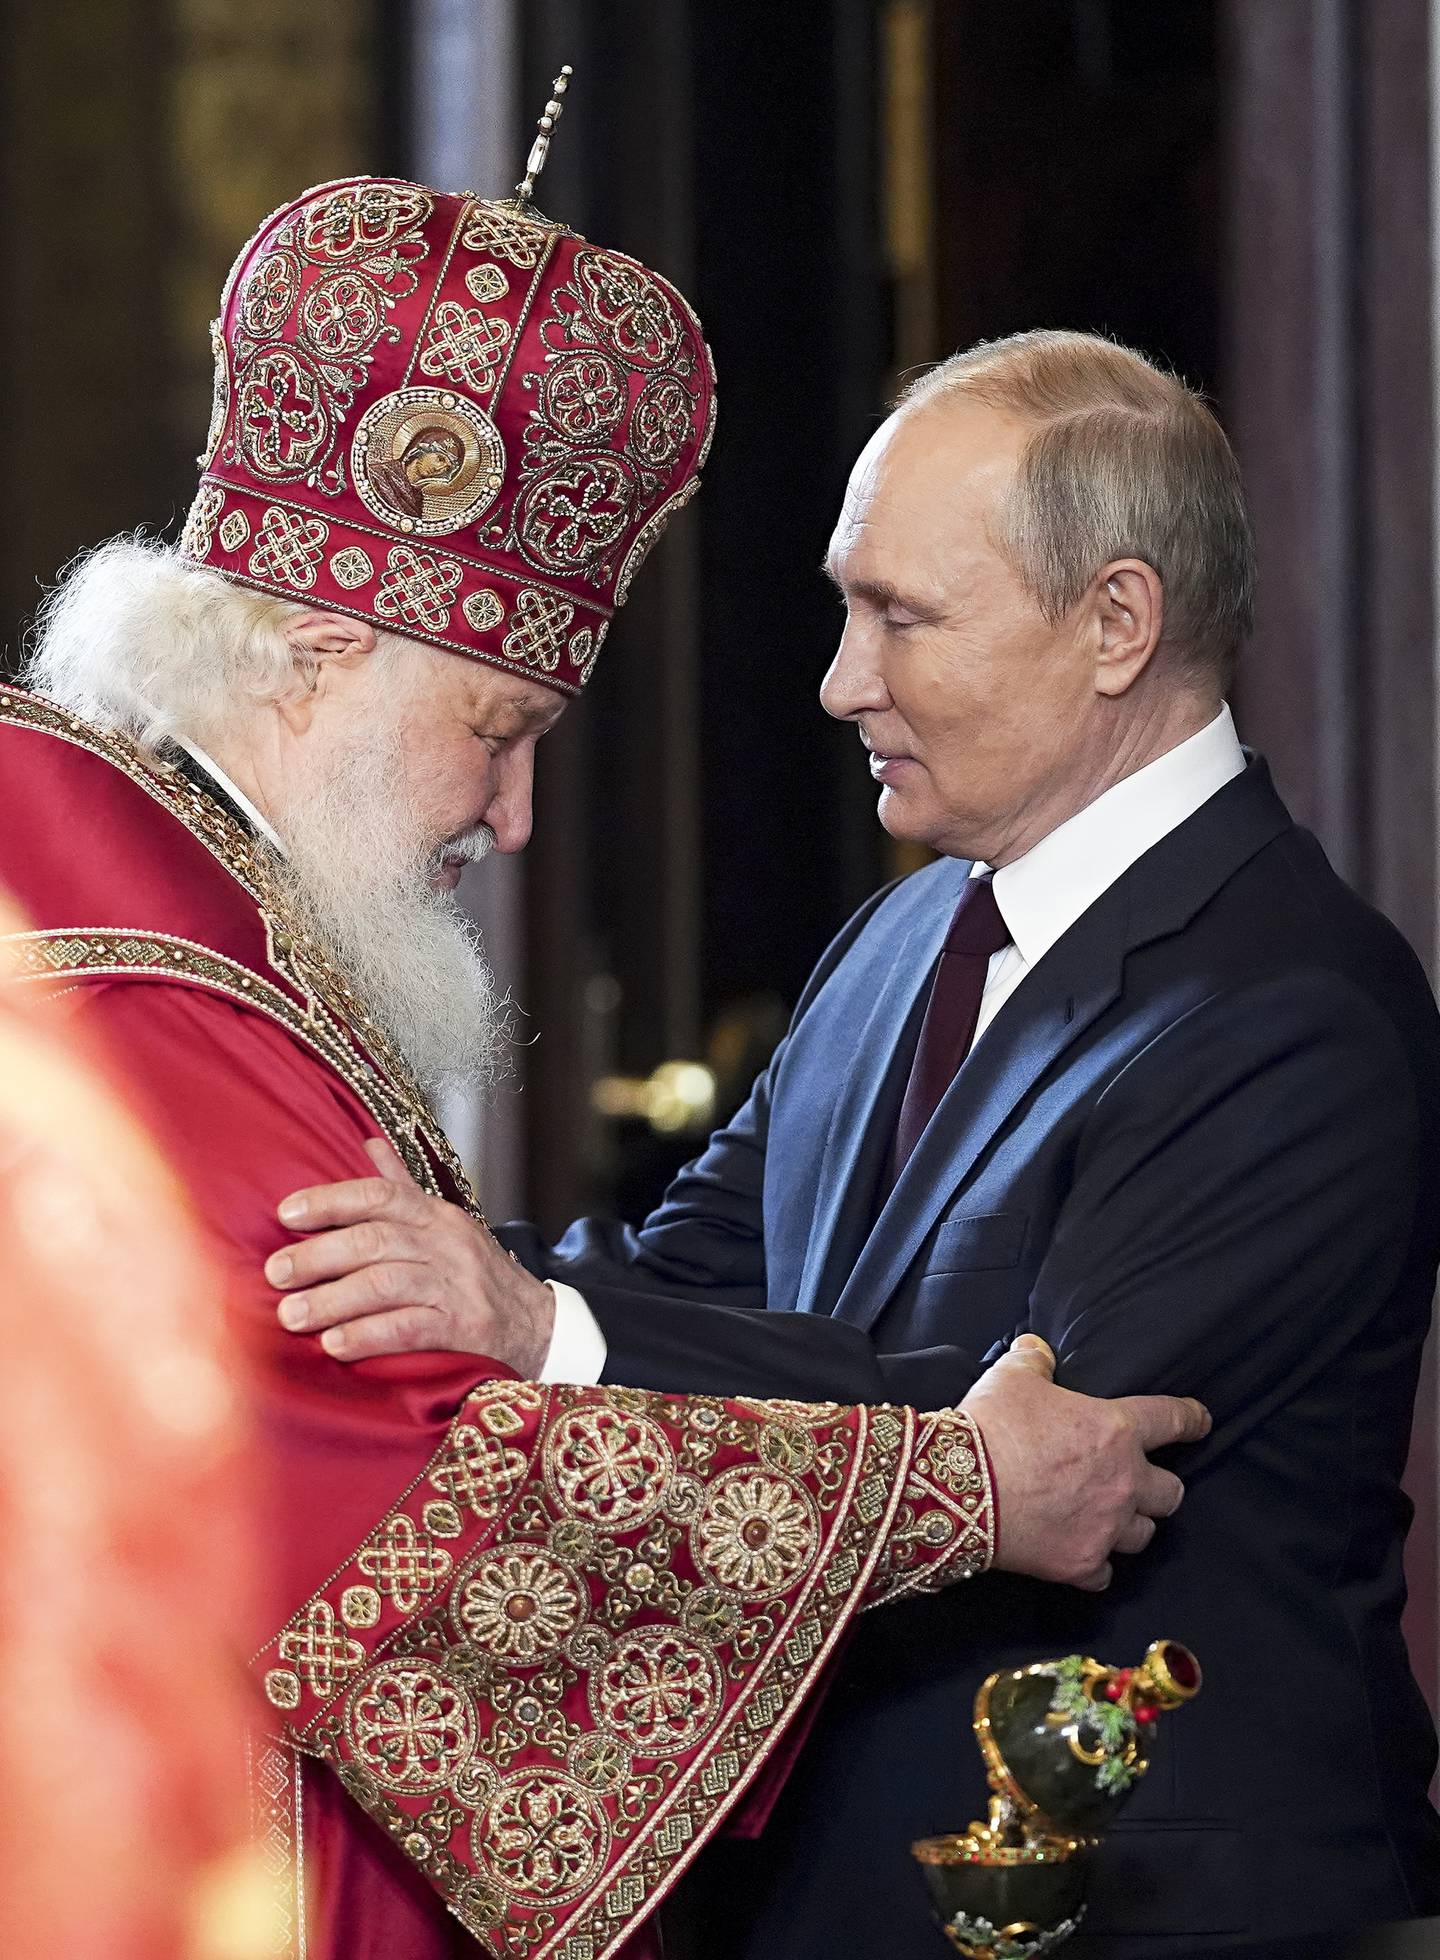 VENNER: In this handout photo released by Russian Orthodox Church Press Service, Russian Orthodox Church Patriarch Kirill, left, and Russian President Vladimir Putin congratulate each other after the Easter service at the Christ the Savior Cathedral in Moscow, Russia, early Sunday, April 24, 2022. Eastern Orthodox churches observe the ancient Julian calendar, and this year celebrate the Orthodox Easter on April 24. (Oleg Varov, Russian Orthodox Church Press Service via AP)